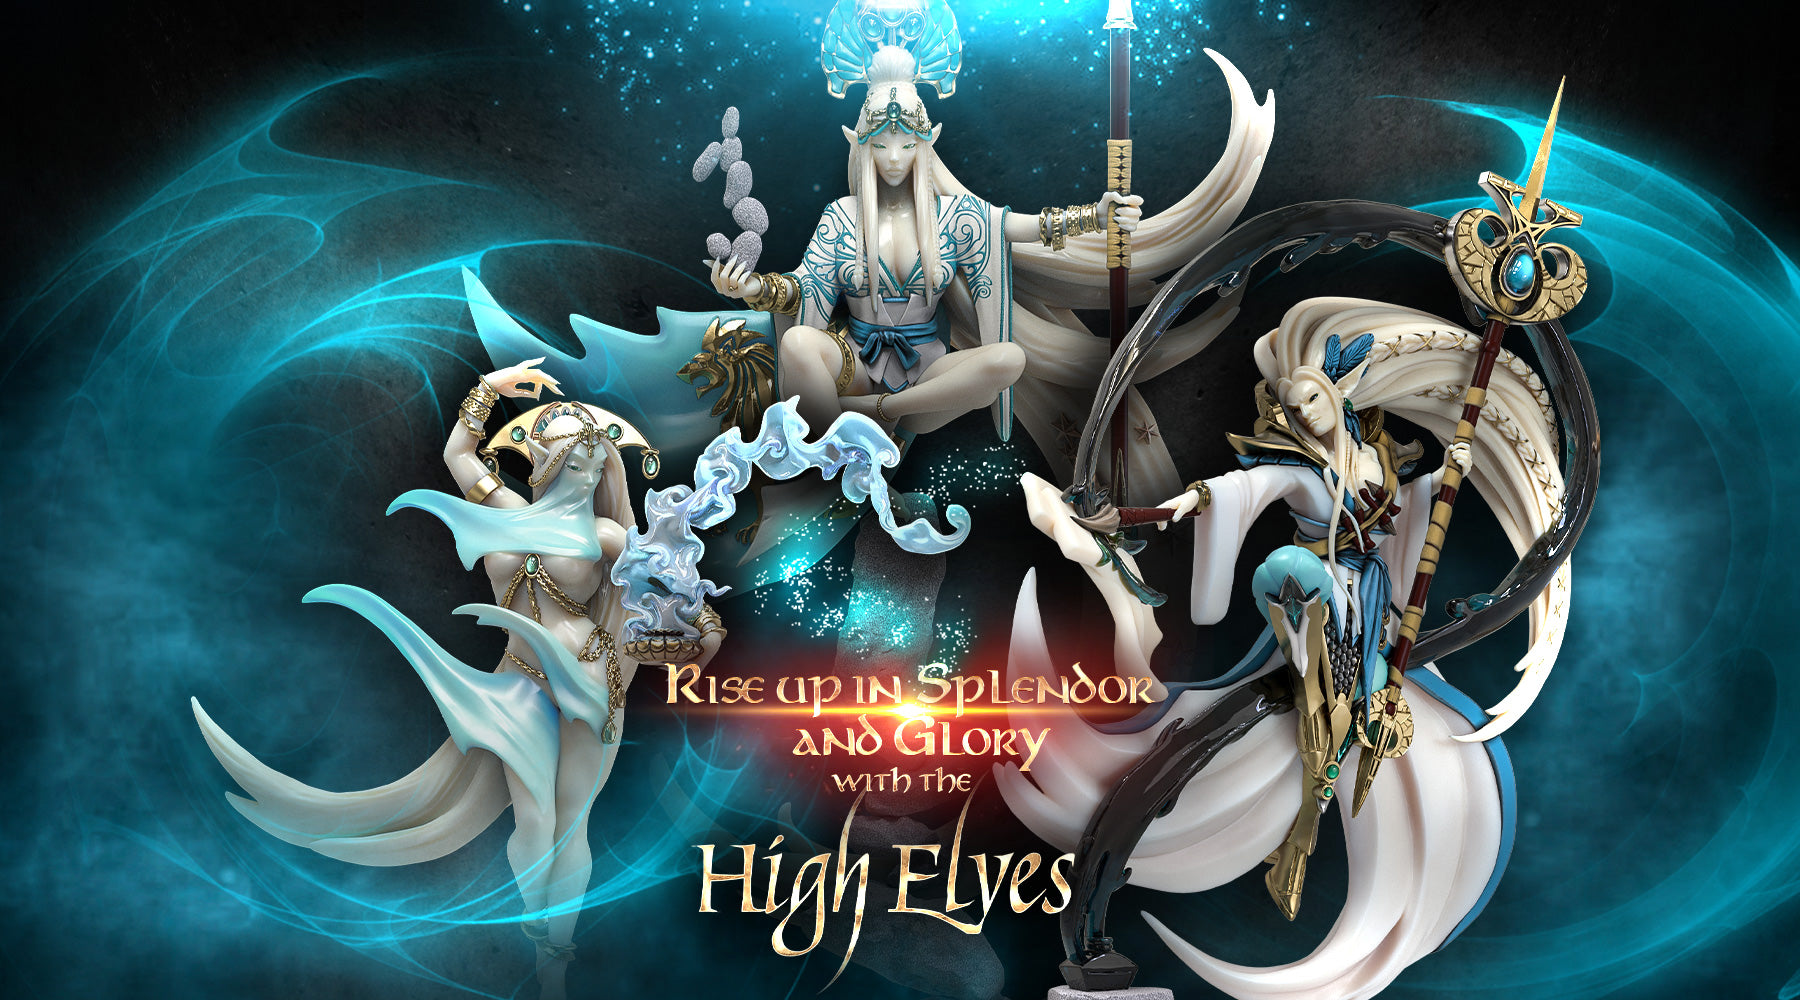 Rise up in splendor and glory with the High Elves